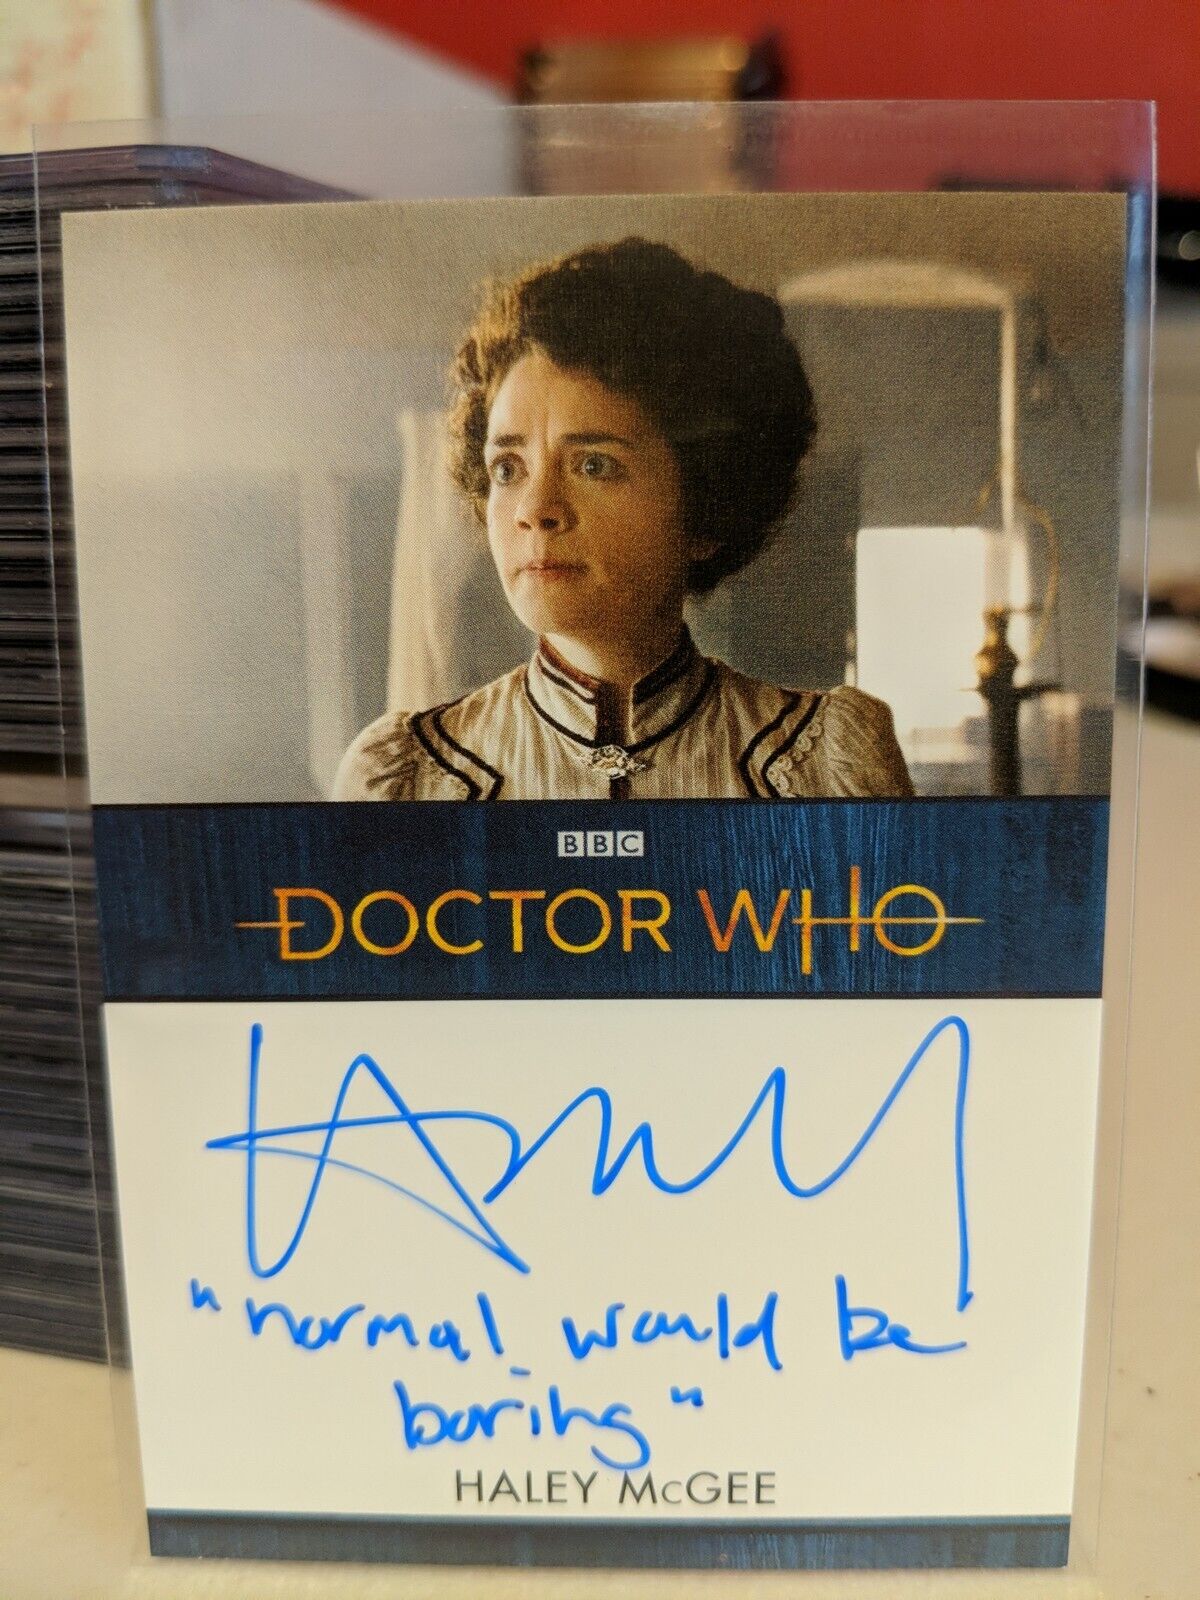 Doctor Who Series 11 & 12 Haley McGee Inscription Autograph Card (Qty: 25-50) NM